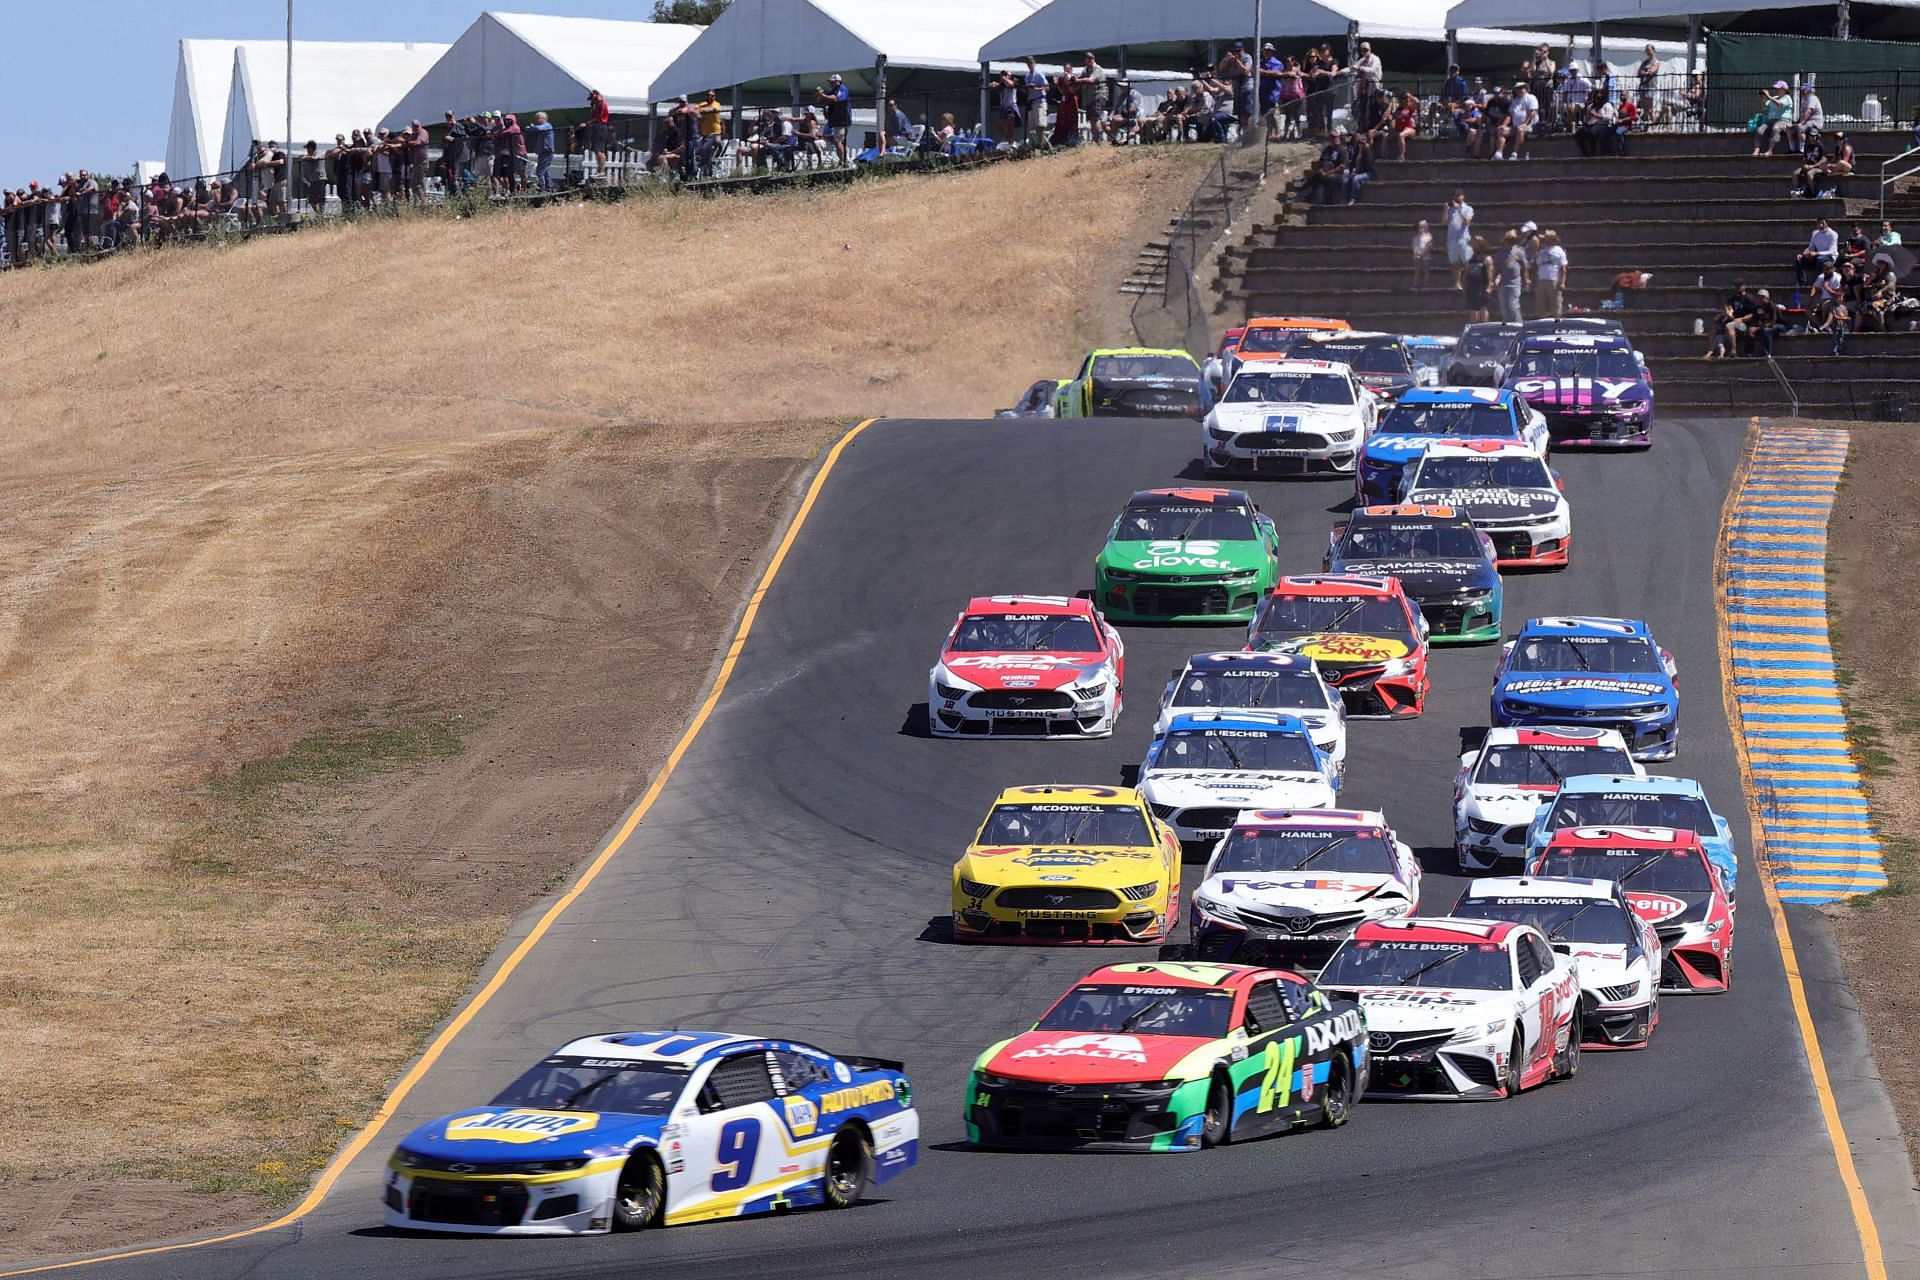 Chase Elliott leads the field during the NASCAR Cup Series Toyota/Save Mart 350 at Sonoma Raceway (Photo by Carmen Mandato/Getty Images)